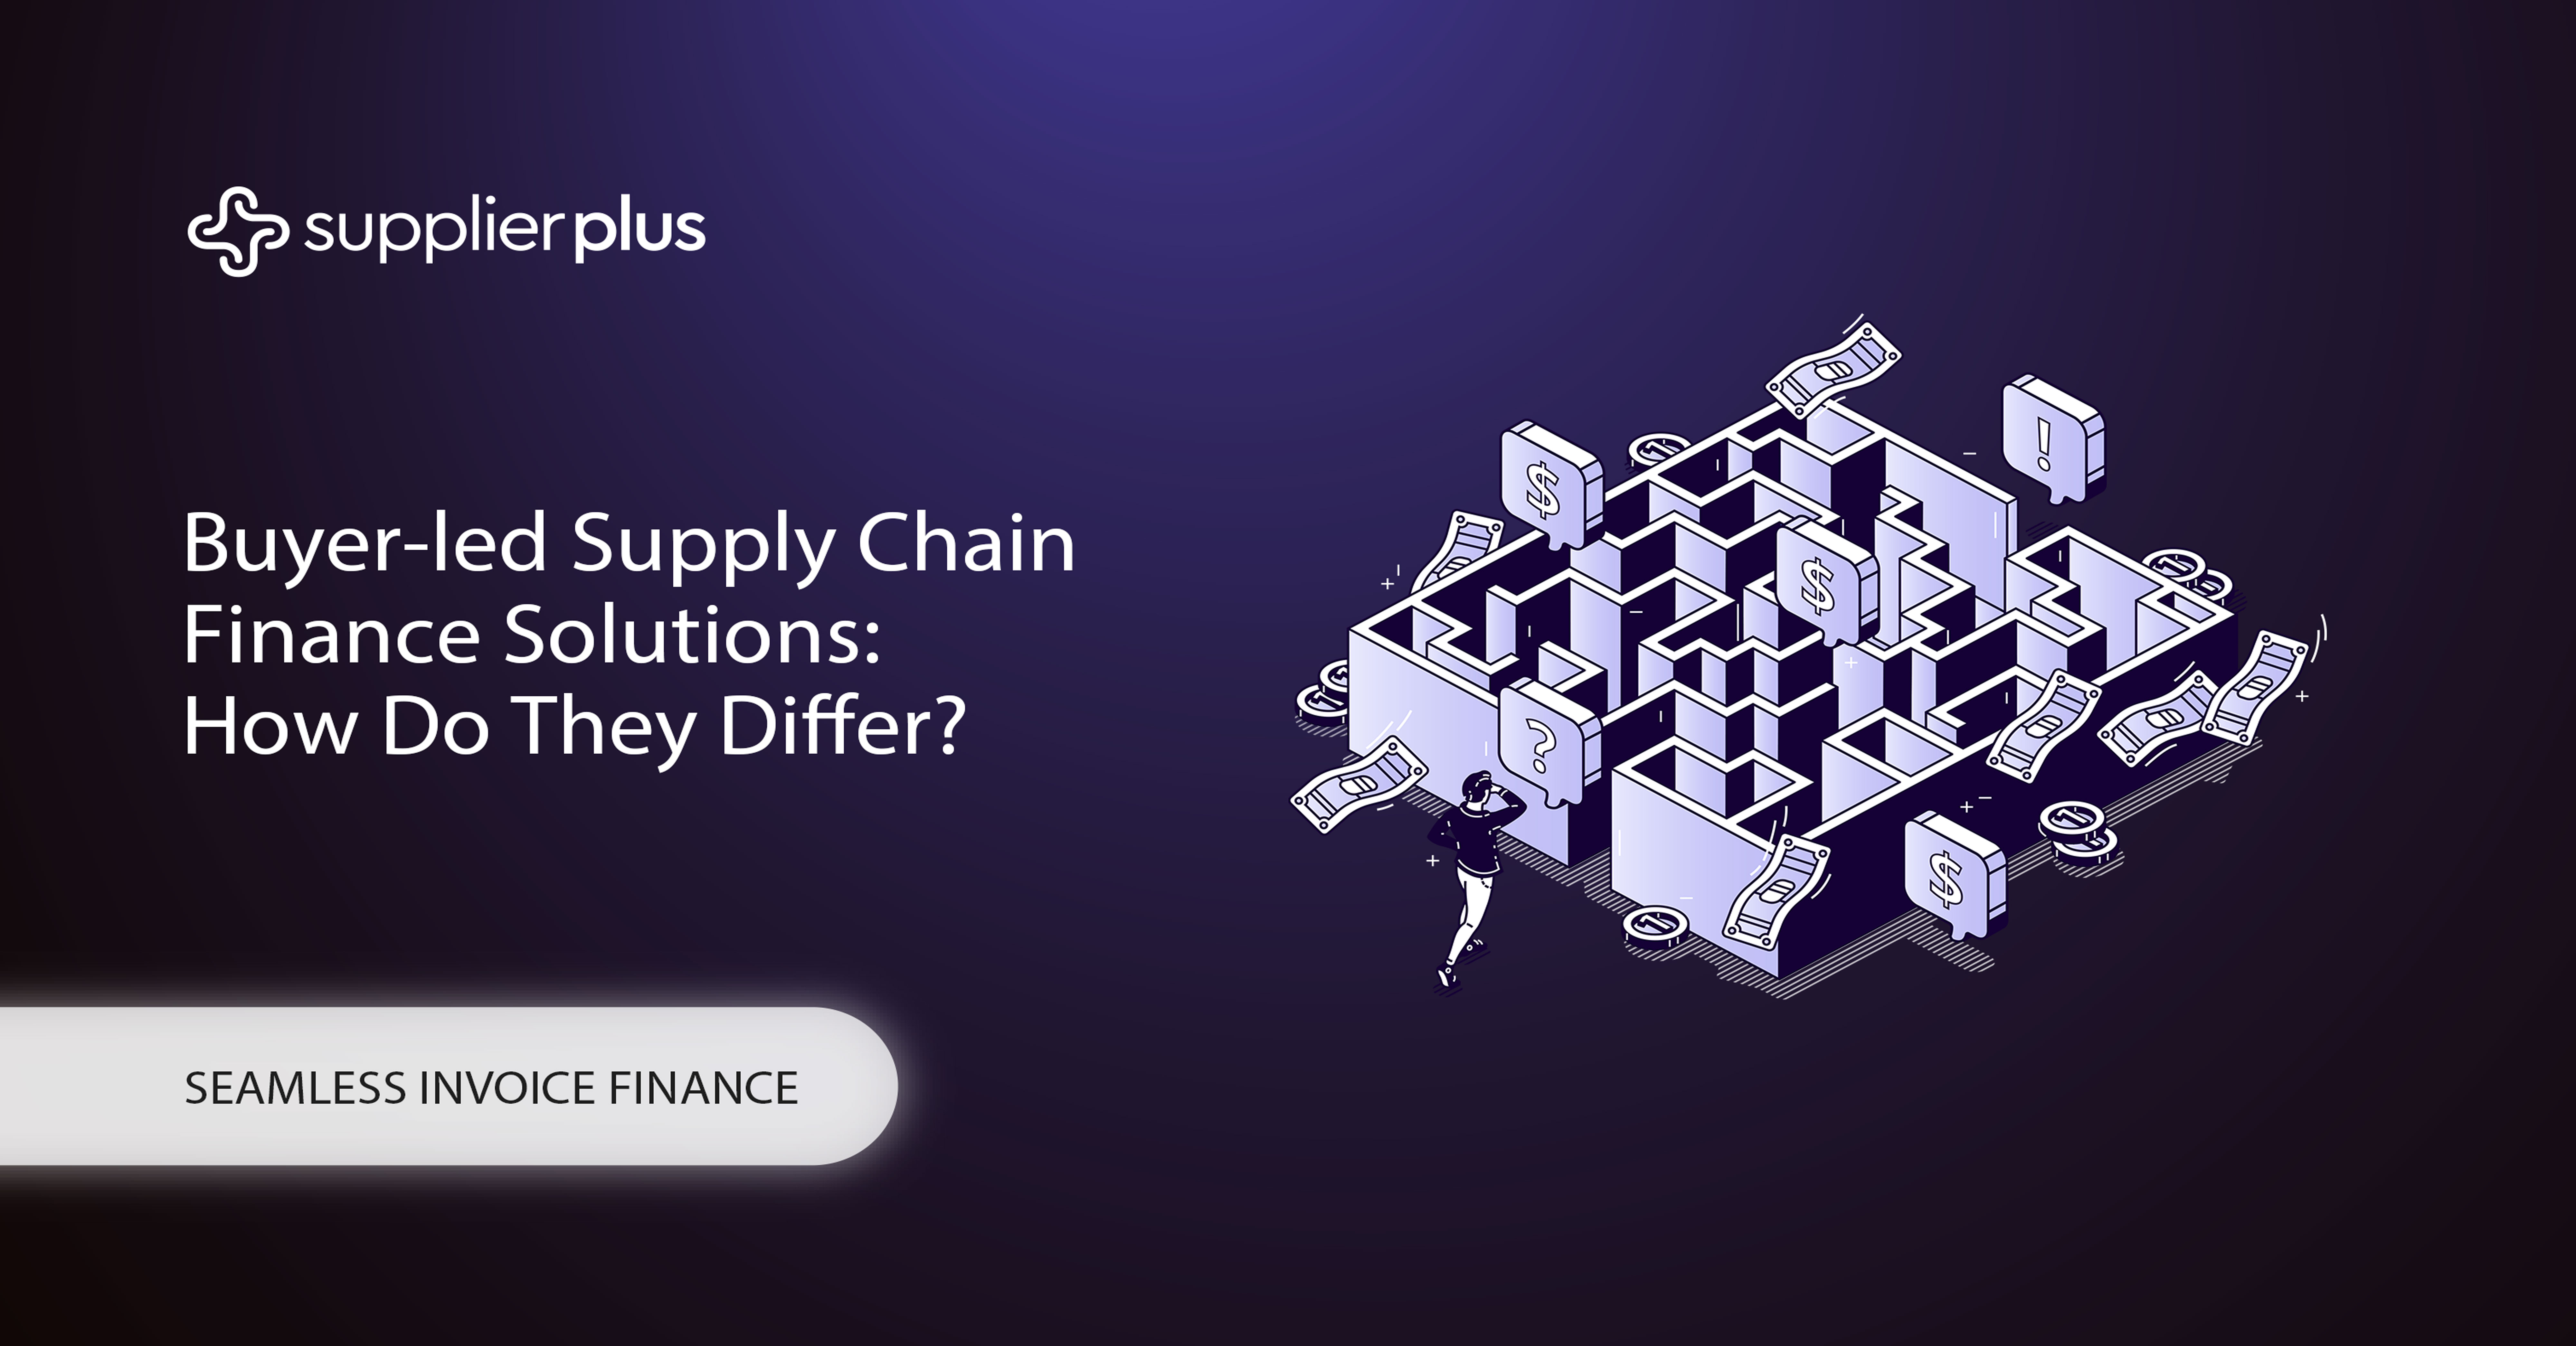 Buyer-led Supply Chain Finance solutions: How do they differ?